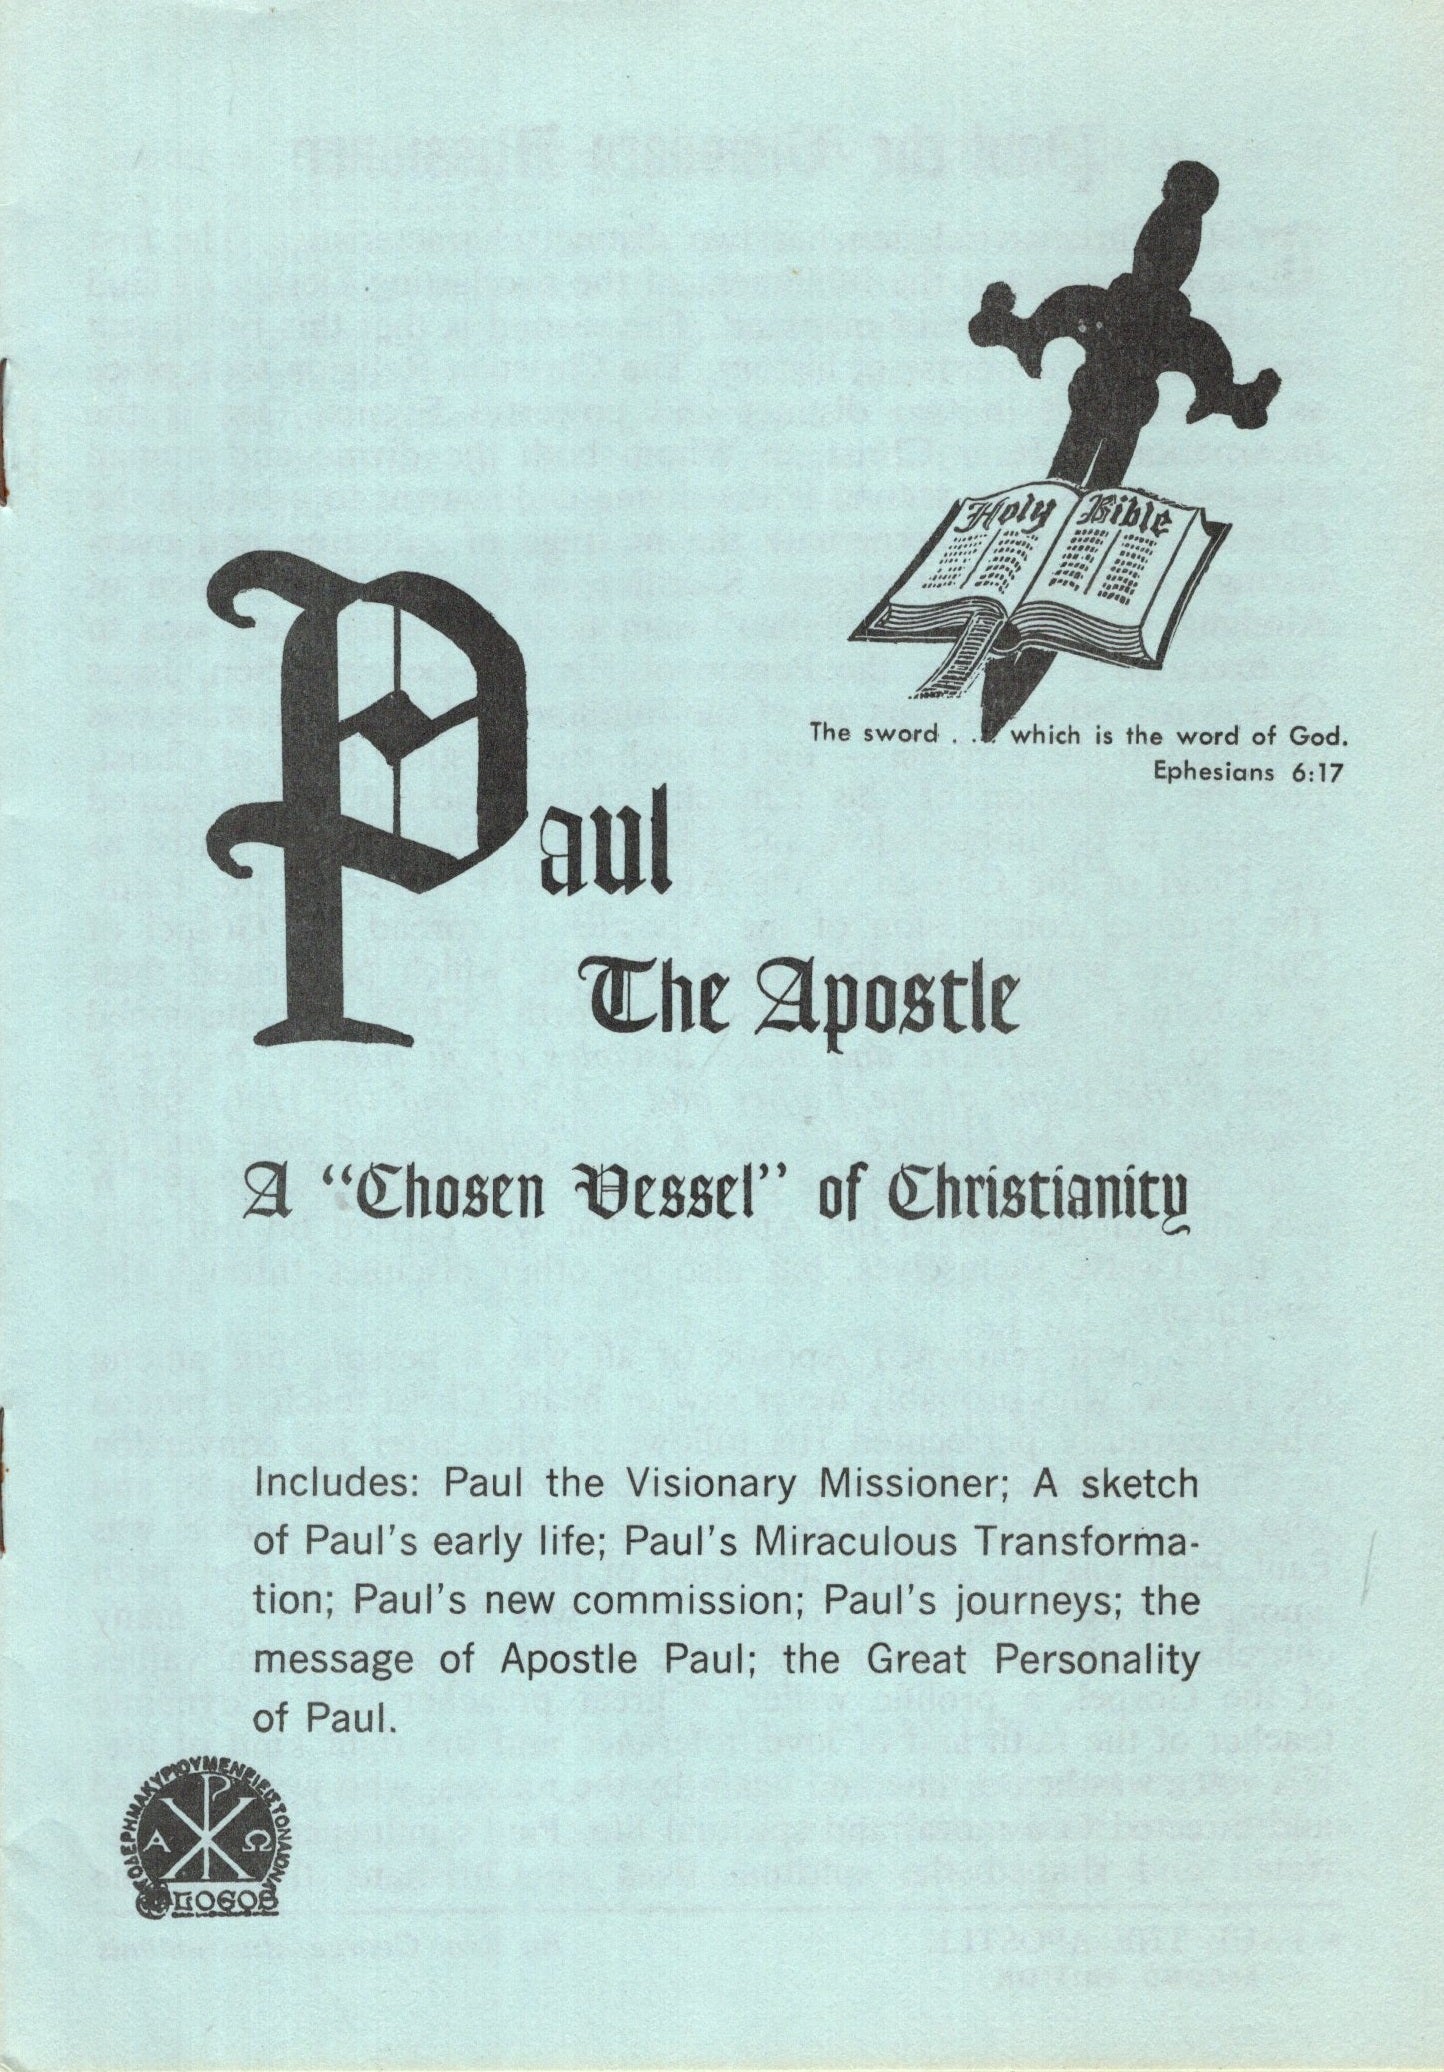 Paul the Apostle: A "Chosen Vessel" of Christianity